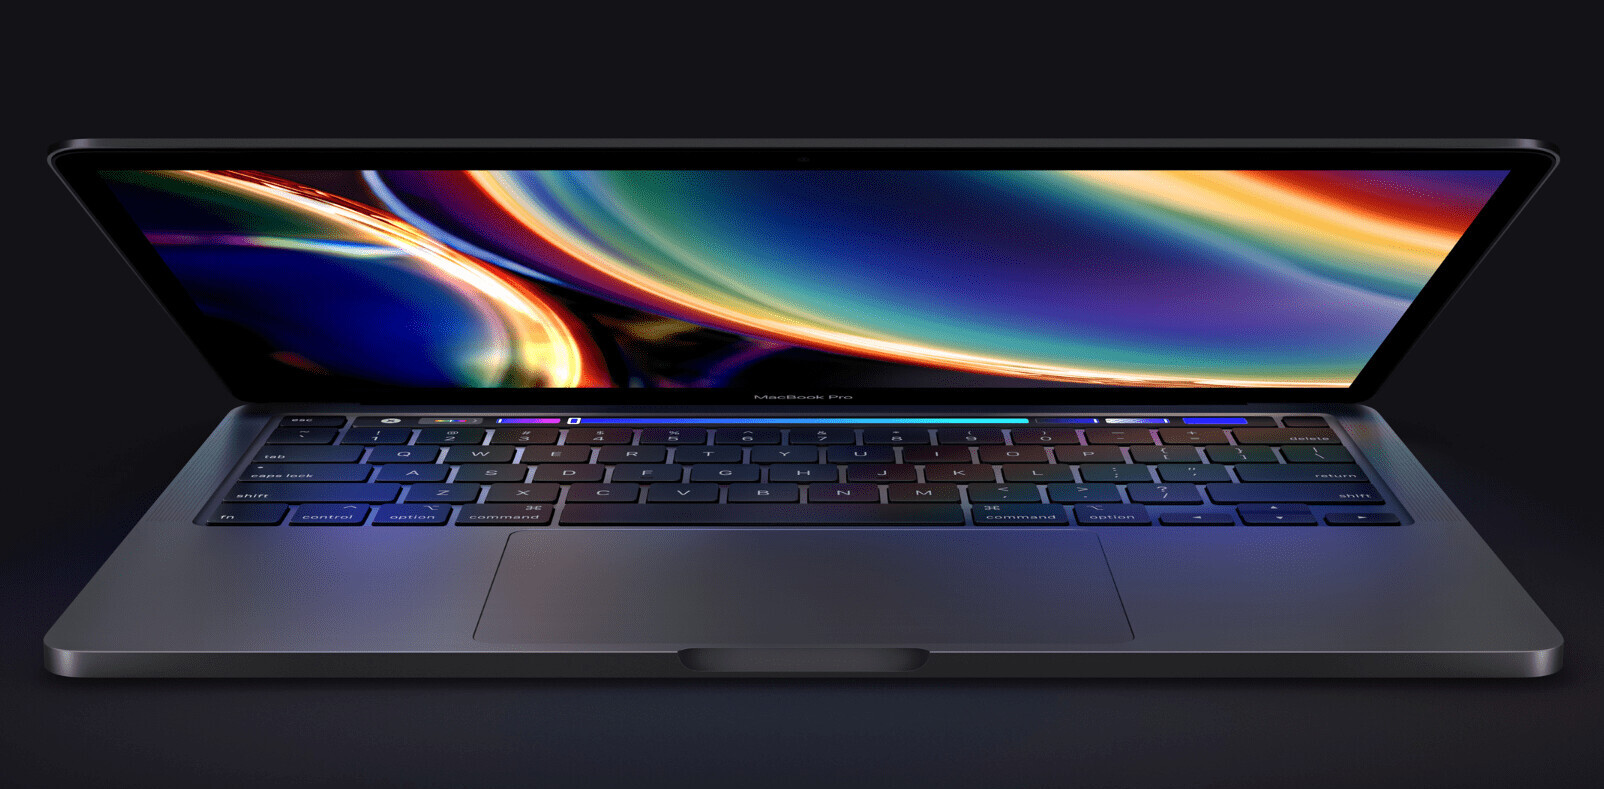 Apple announces new 13-inch MacBook Pro, killing the butterfly keyboard once and for all